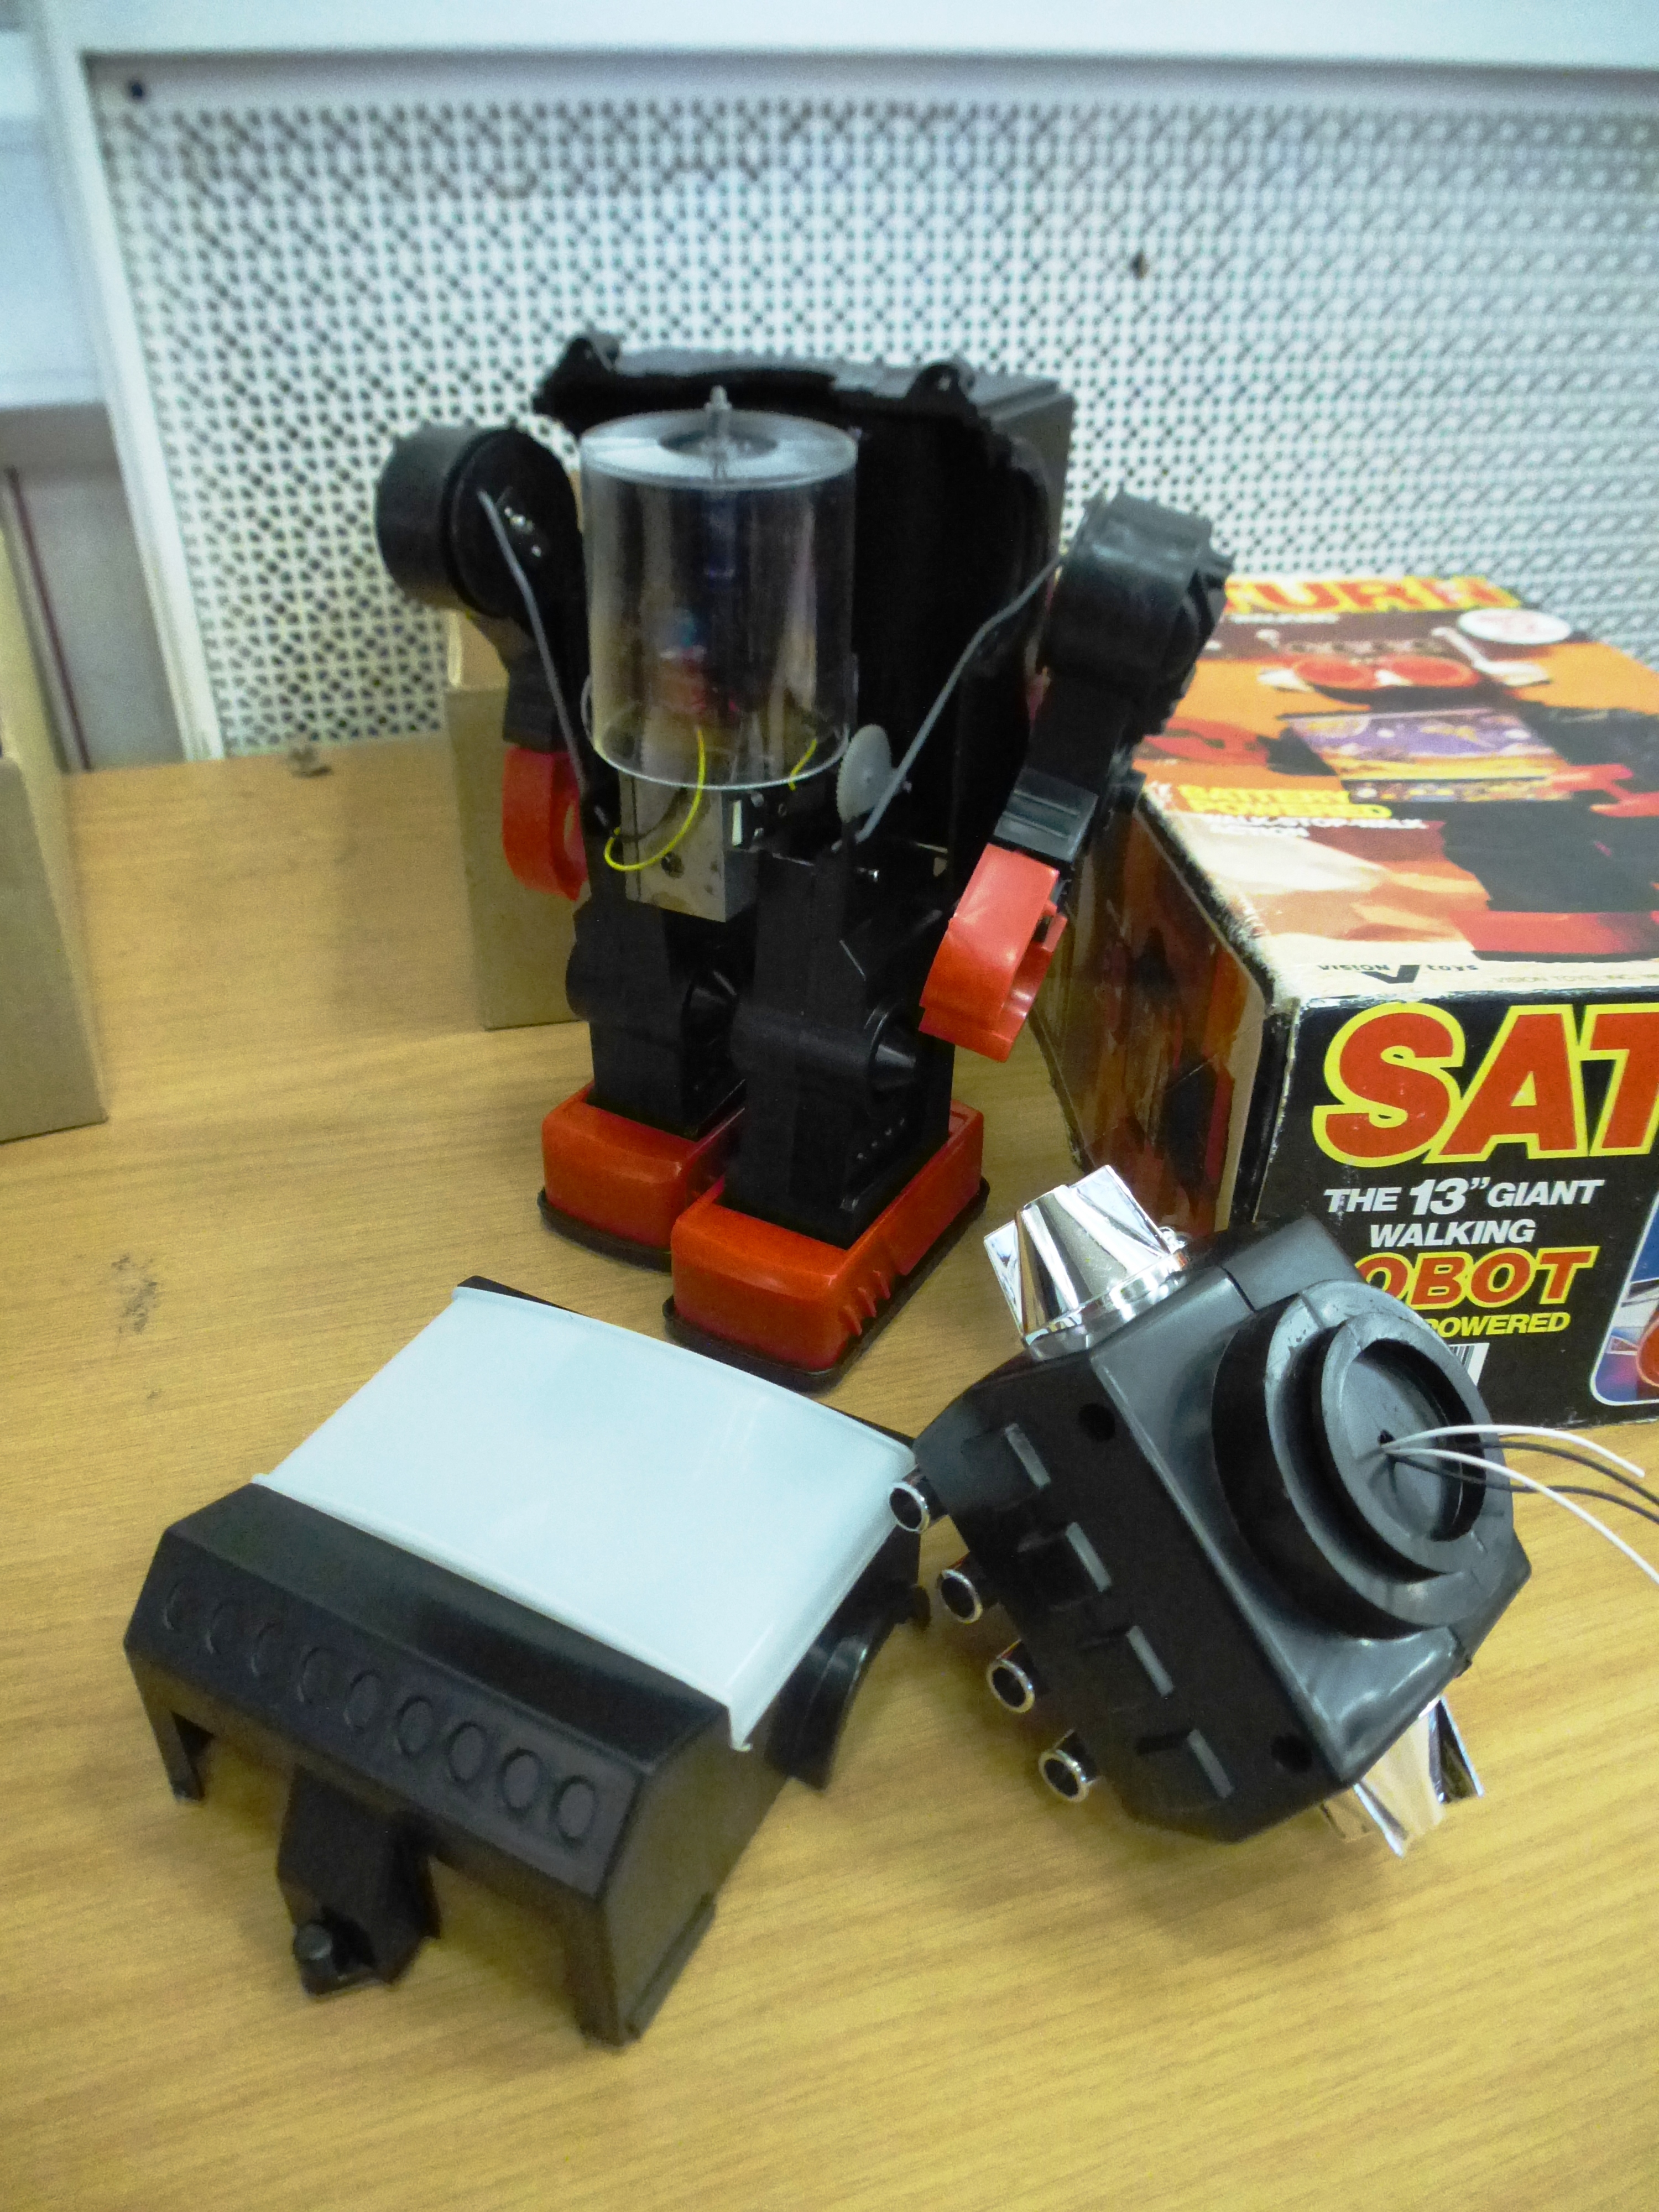 2 BOXED TV SCREEN ROBOTS - JUPITER AND SATURN (INCOMPLETE) - Image 4 of 7